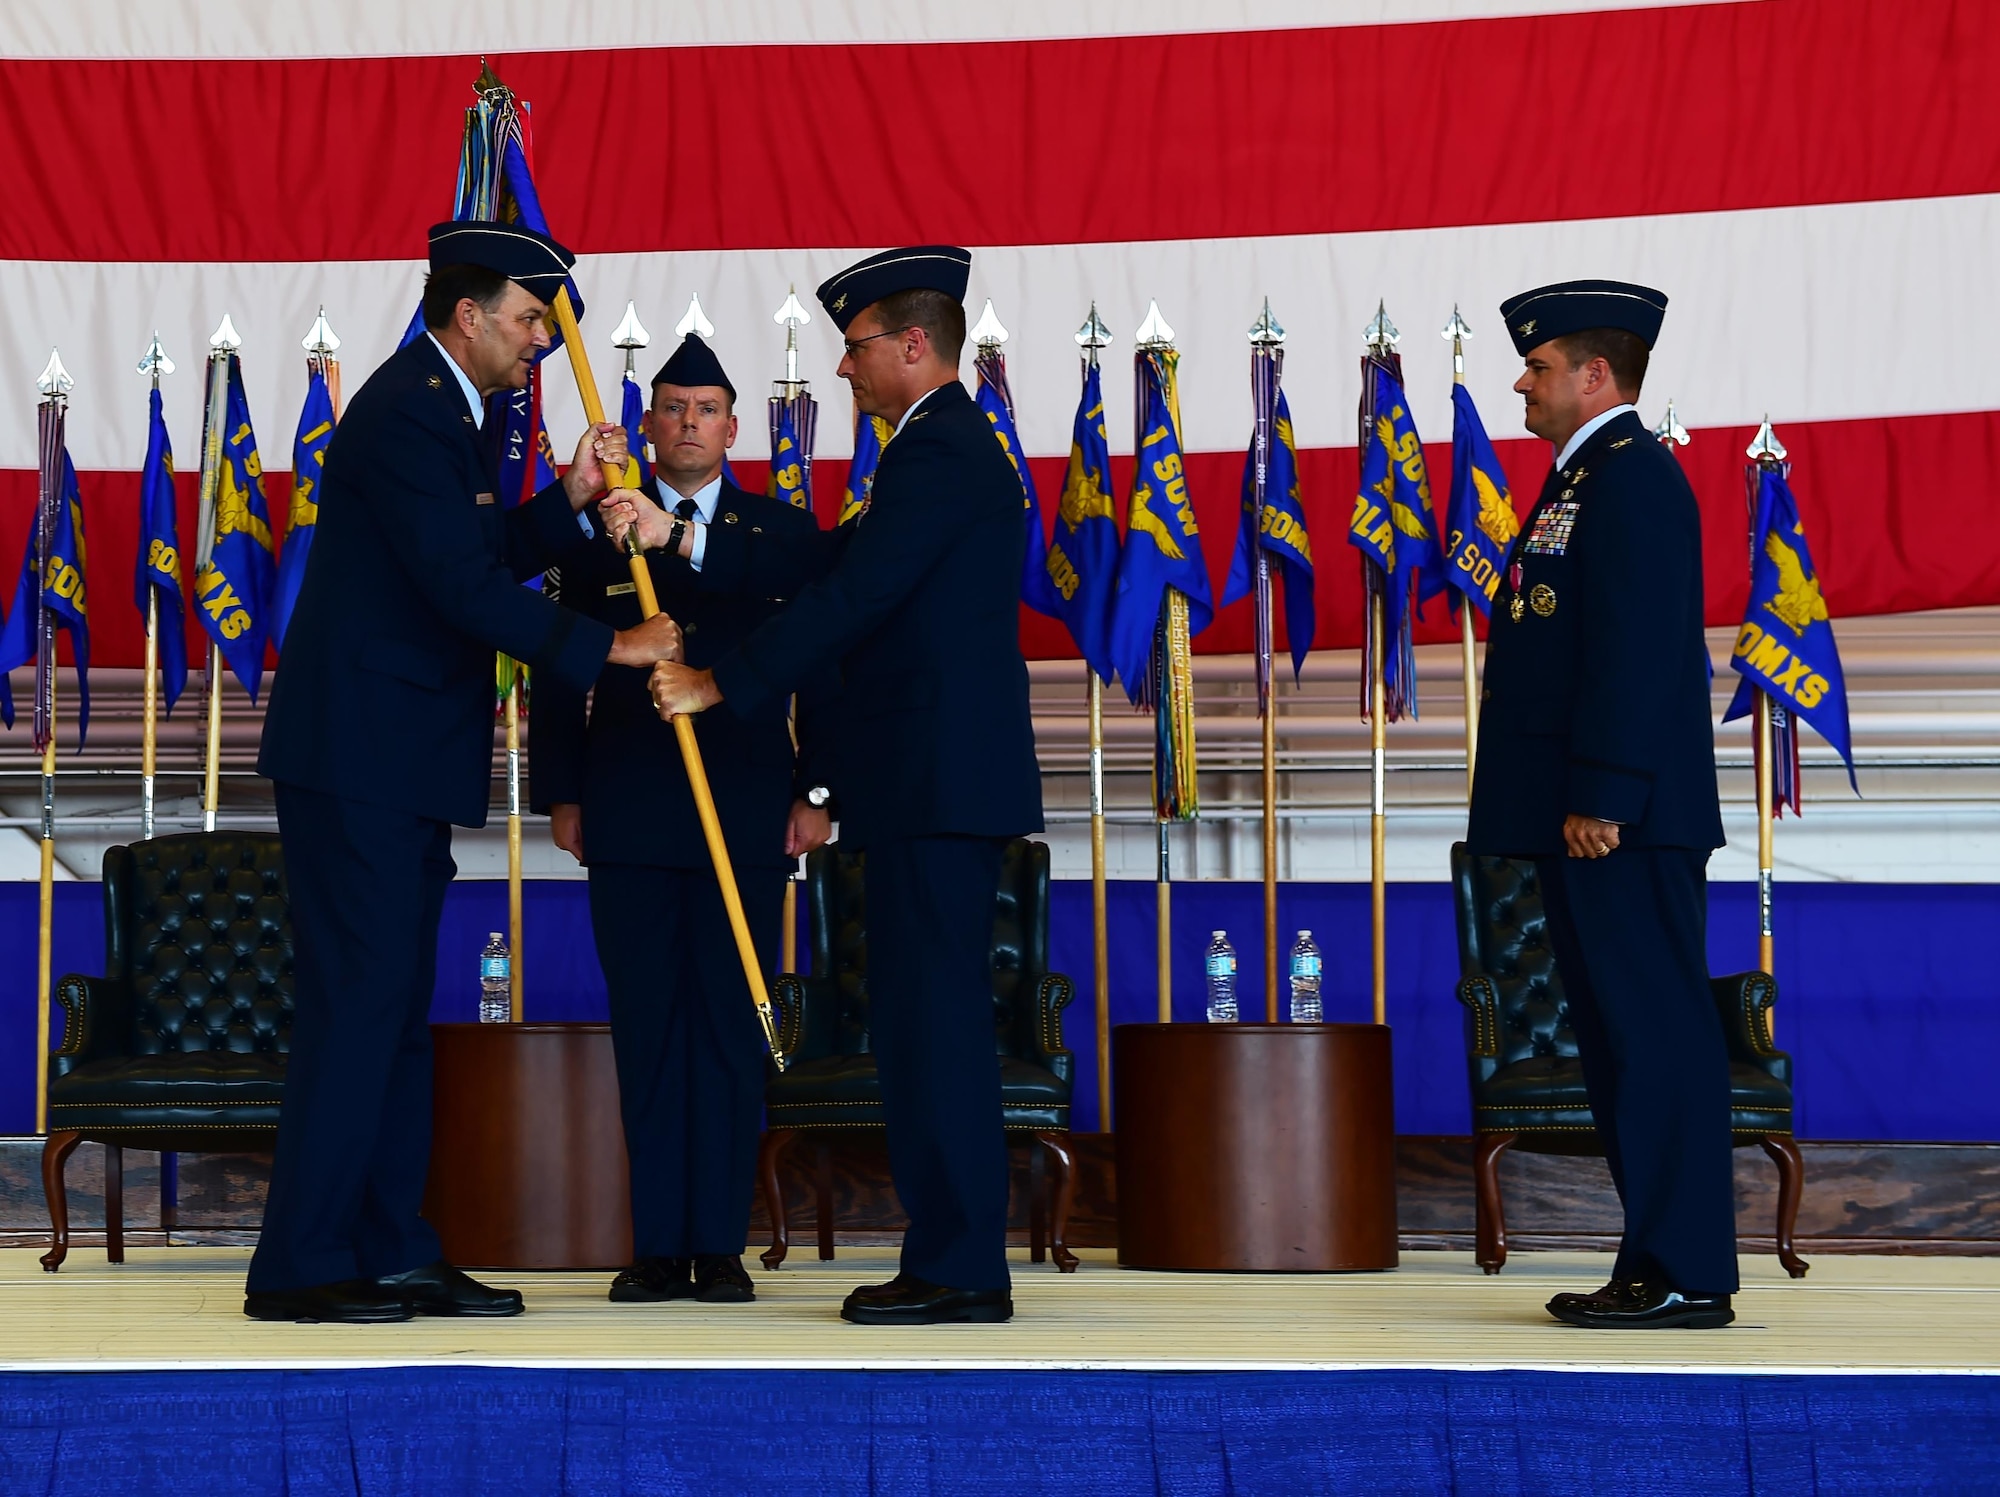 Col. Tom Palenske, commander of the 1st Special Operations Wing, takes the guidon from Lt. Gen. Brad Heithold, commander of Air Force Special Operations Command, to assume command of the 1st SOW during a change of command ceremony at Hurlburt Field, Fla., June 10, 2016. Upon taking command of the 1st SOW, Palenske will be responsible for preparing Air Force special operations forces for missions worldwide in support of Army, Navy, Marine and allied special operations forces and USAF counterparts. (U.S. Air Force photo by Senior Airman Andrea Posey)